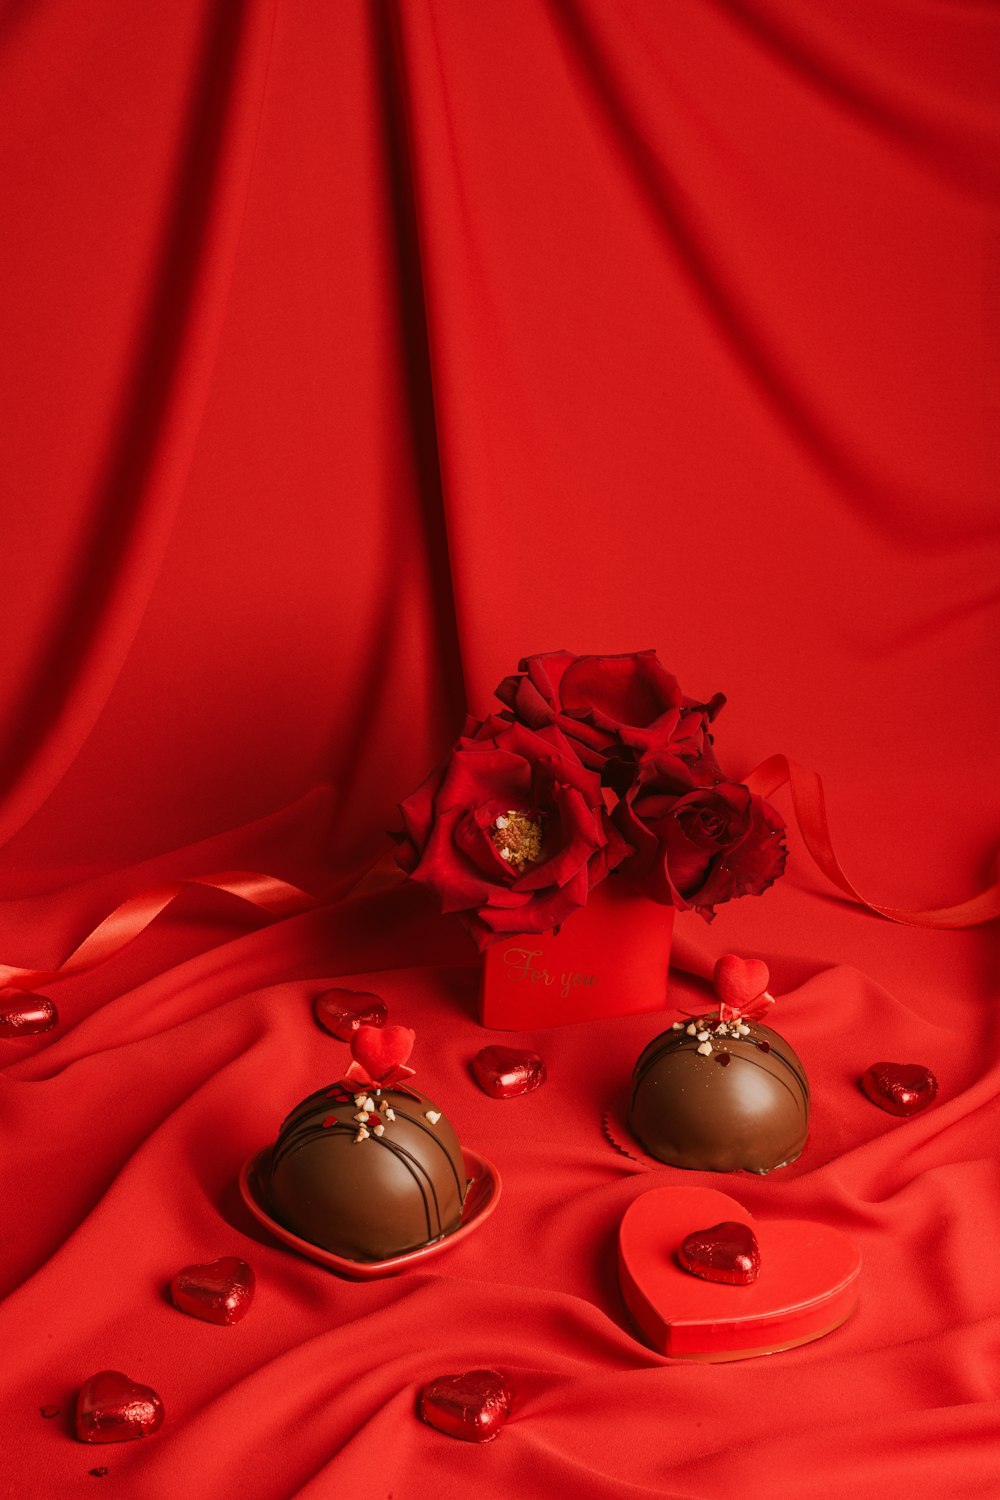 a vase of flowers and two chocolates on a red cloth